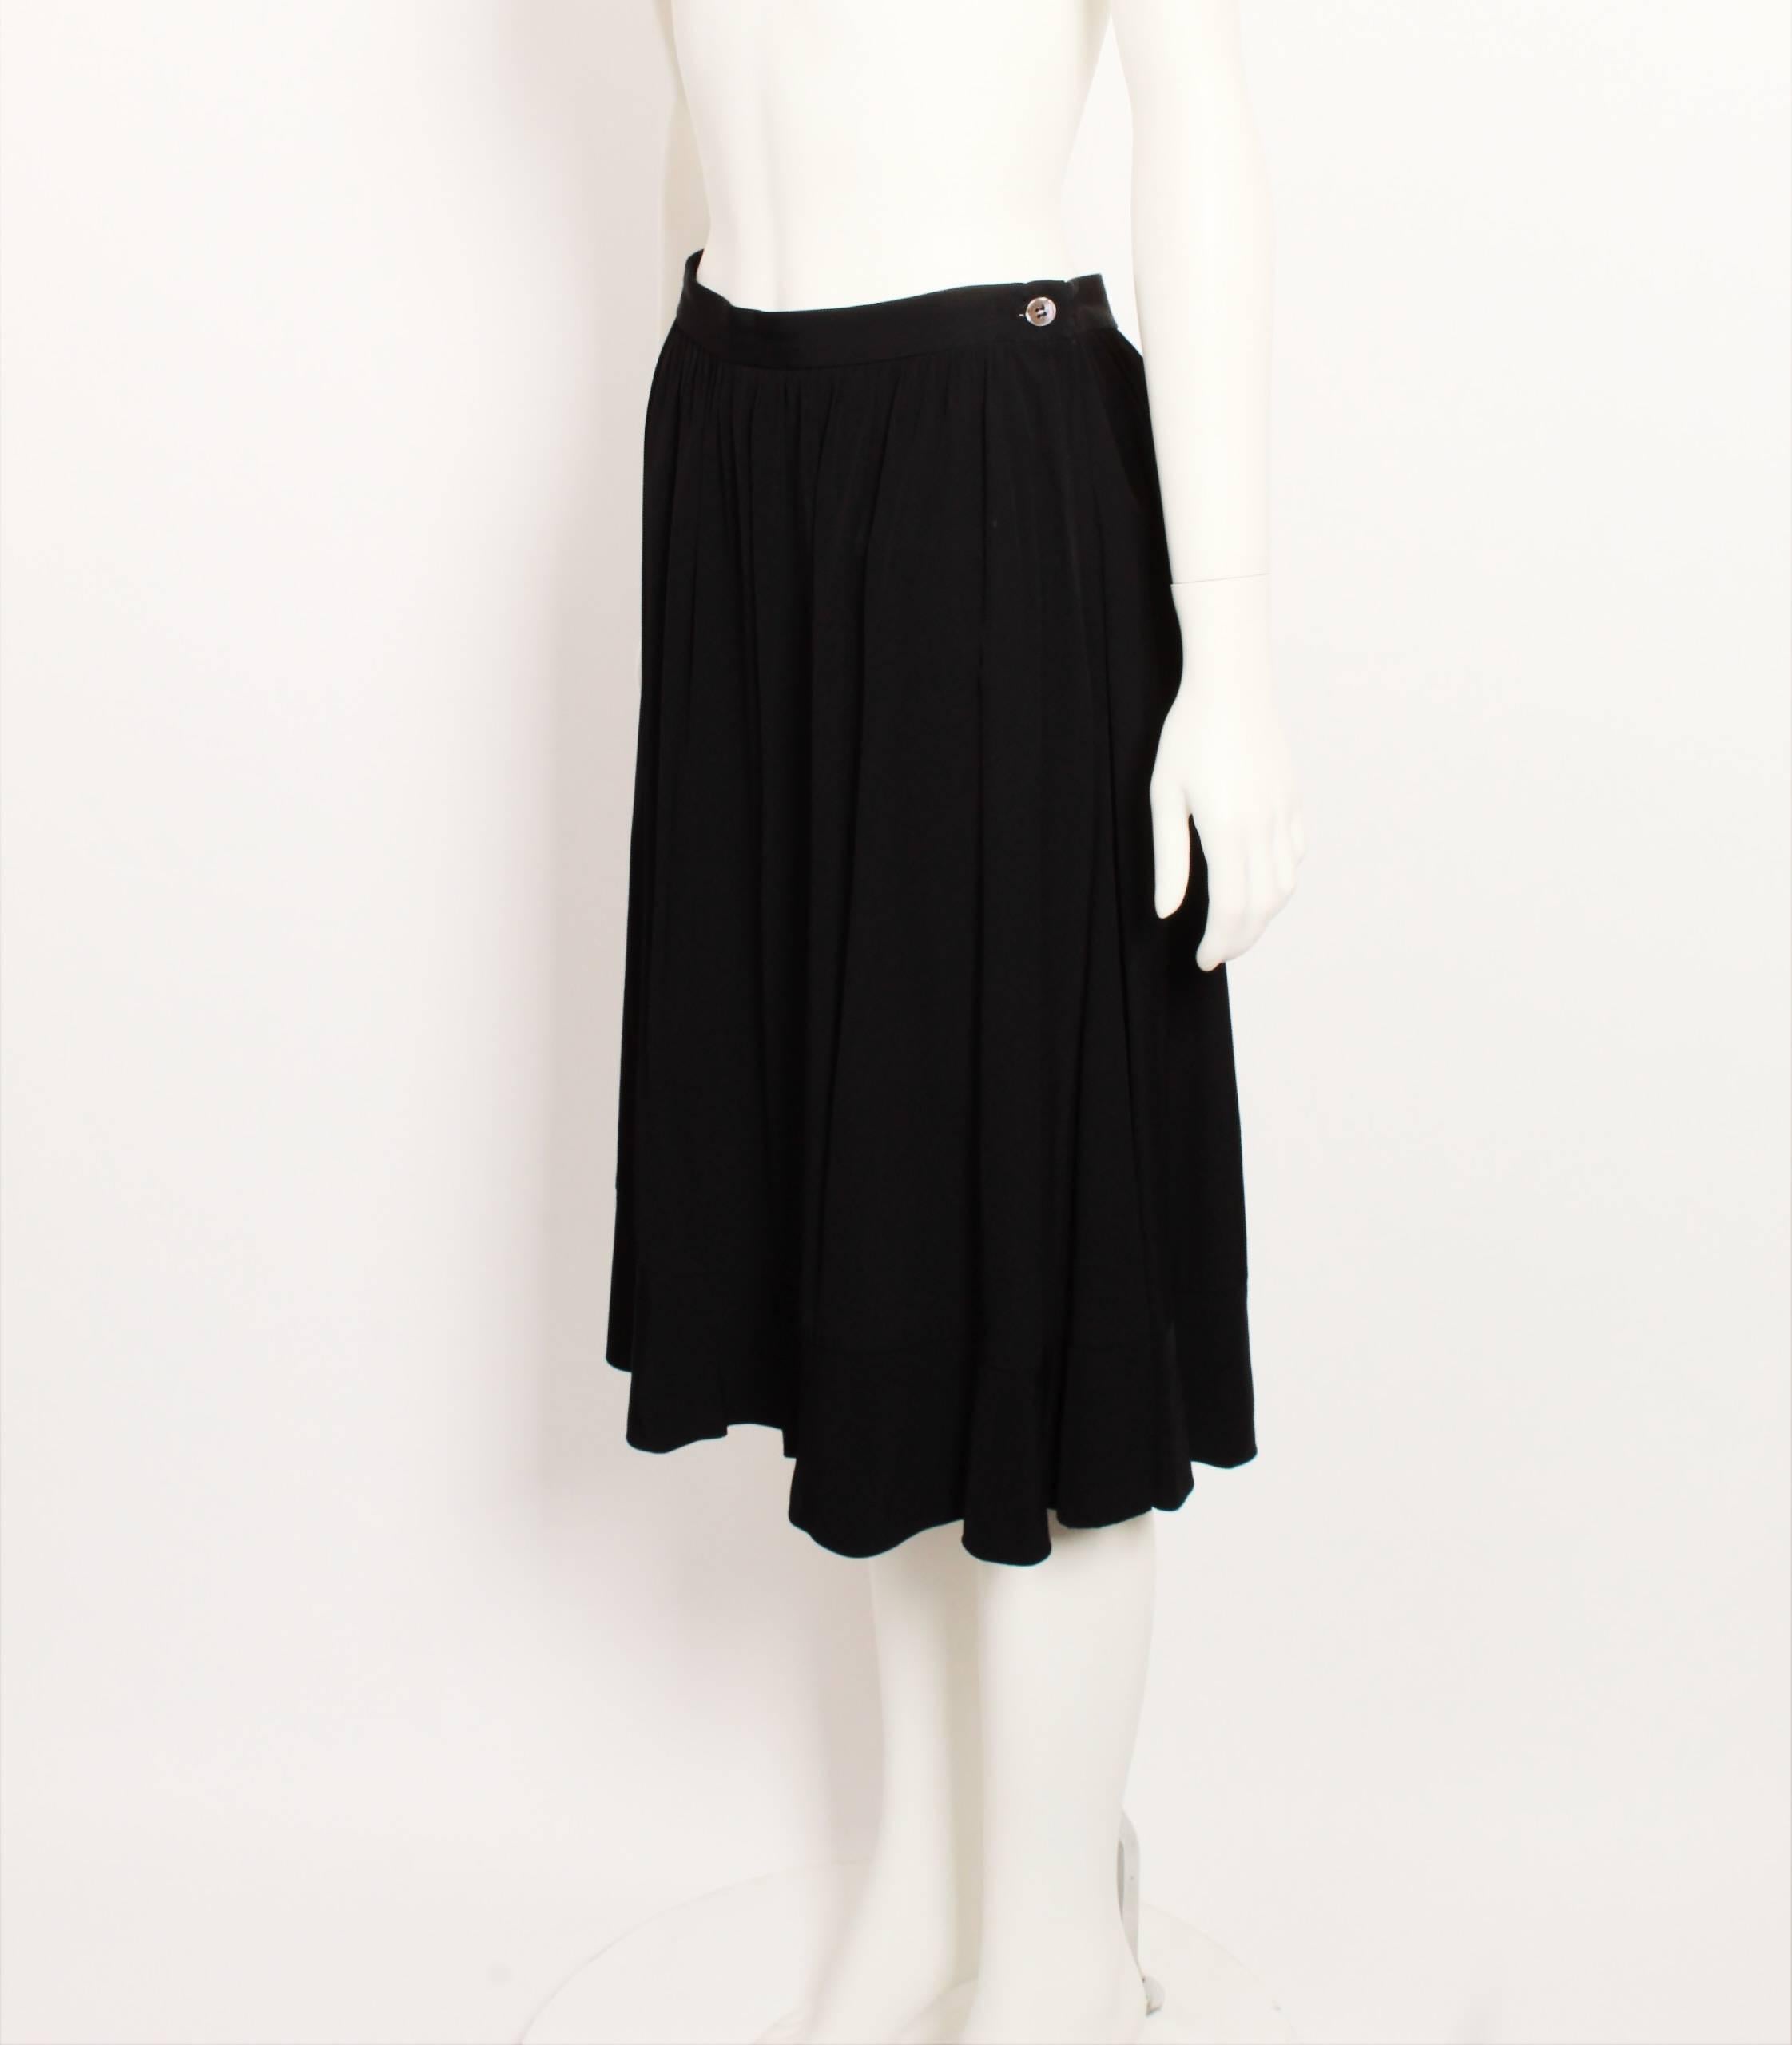 Comme des Garcons black  A-line skirt with hem frill. 
Made in Italy. Size M.